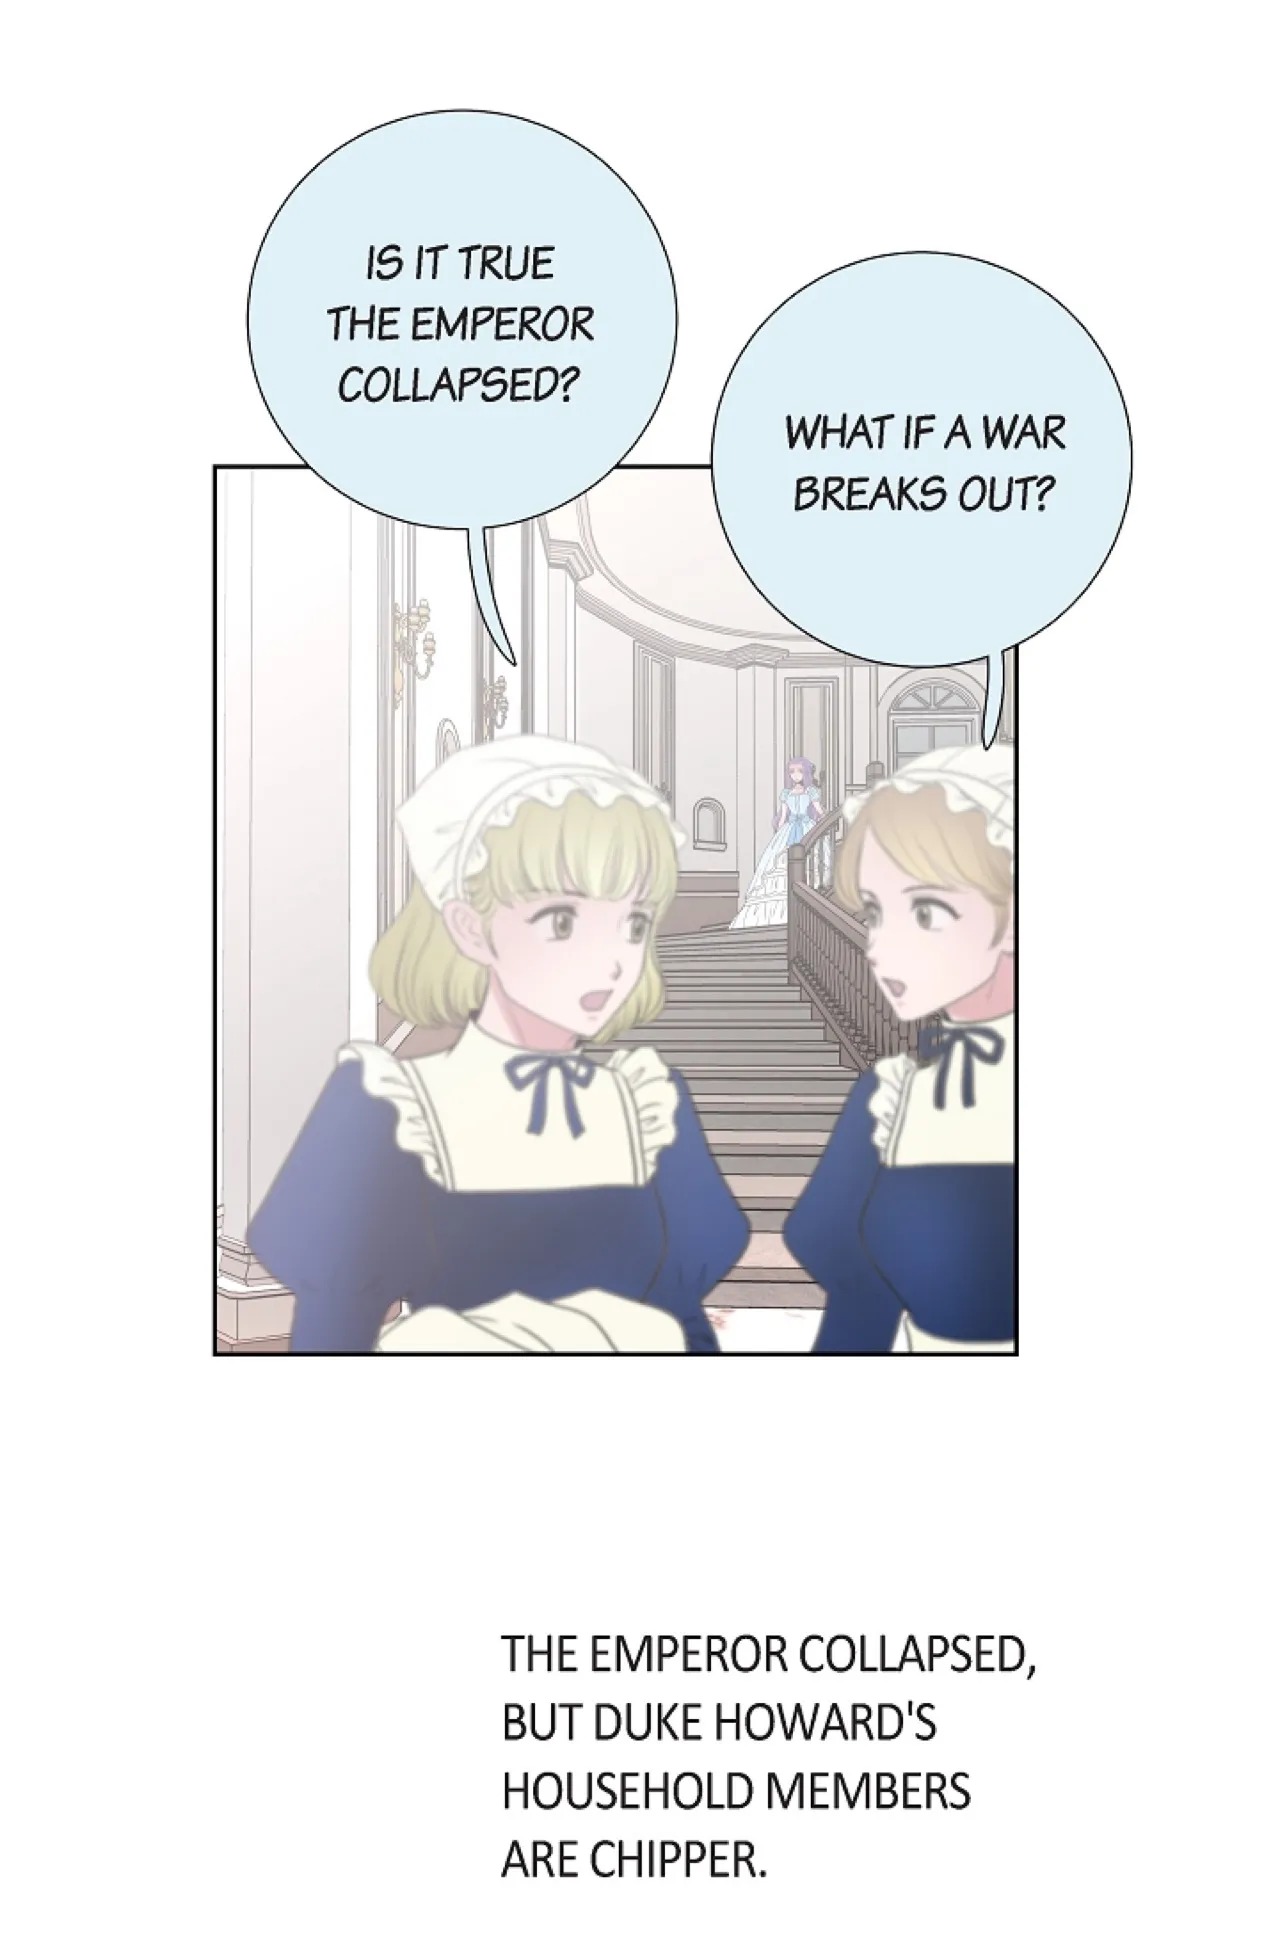 On the Emperor's Lap Ch.27